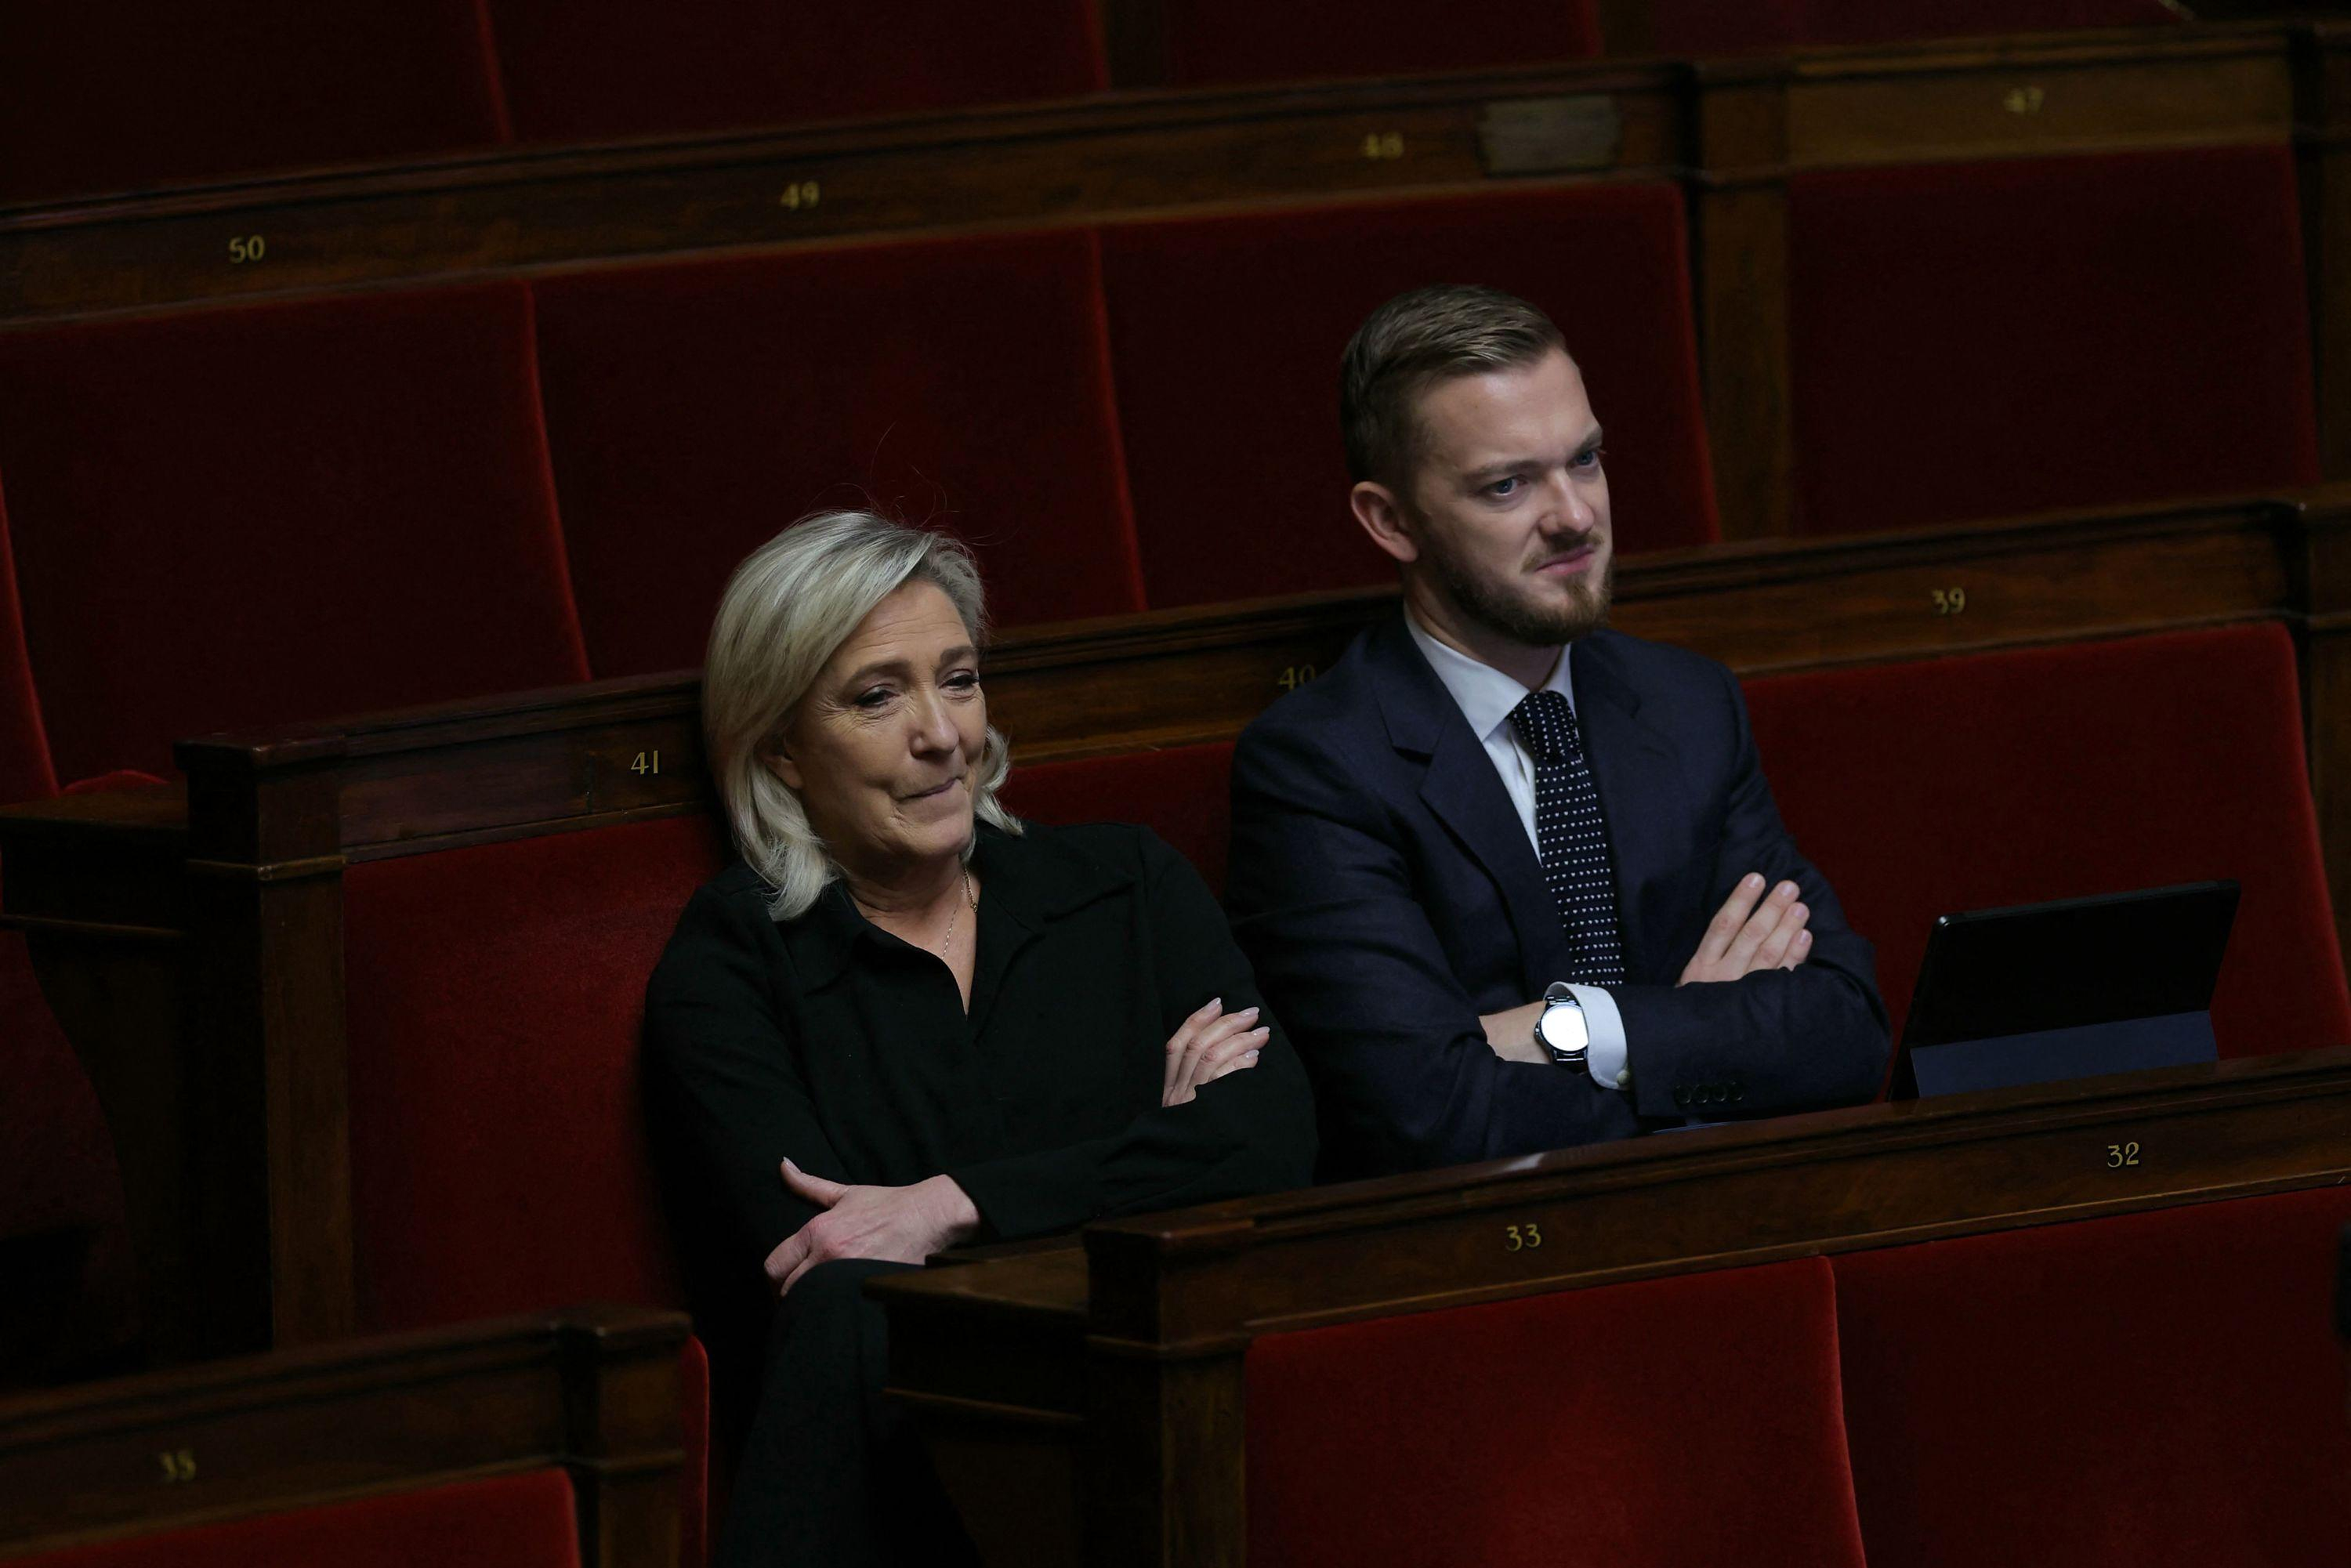 “Shut up”: in the middle of a session at the Assembly, Marine Le Pen gets angry with former minister Nadia Hai